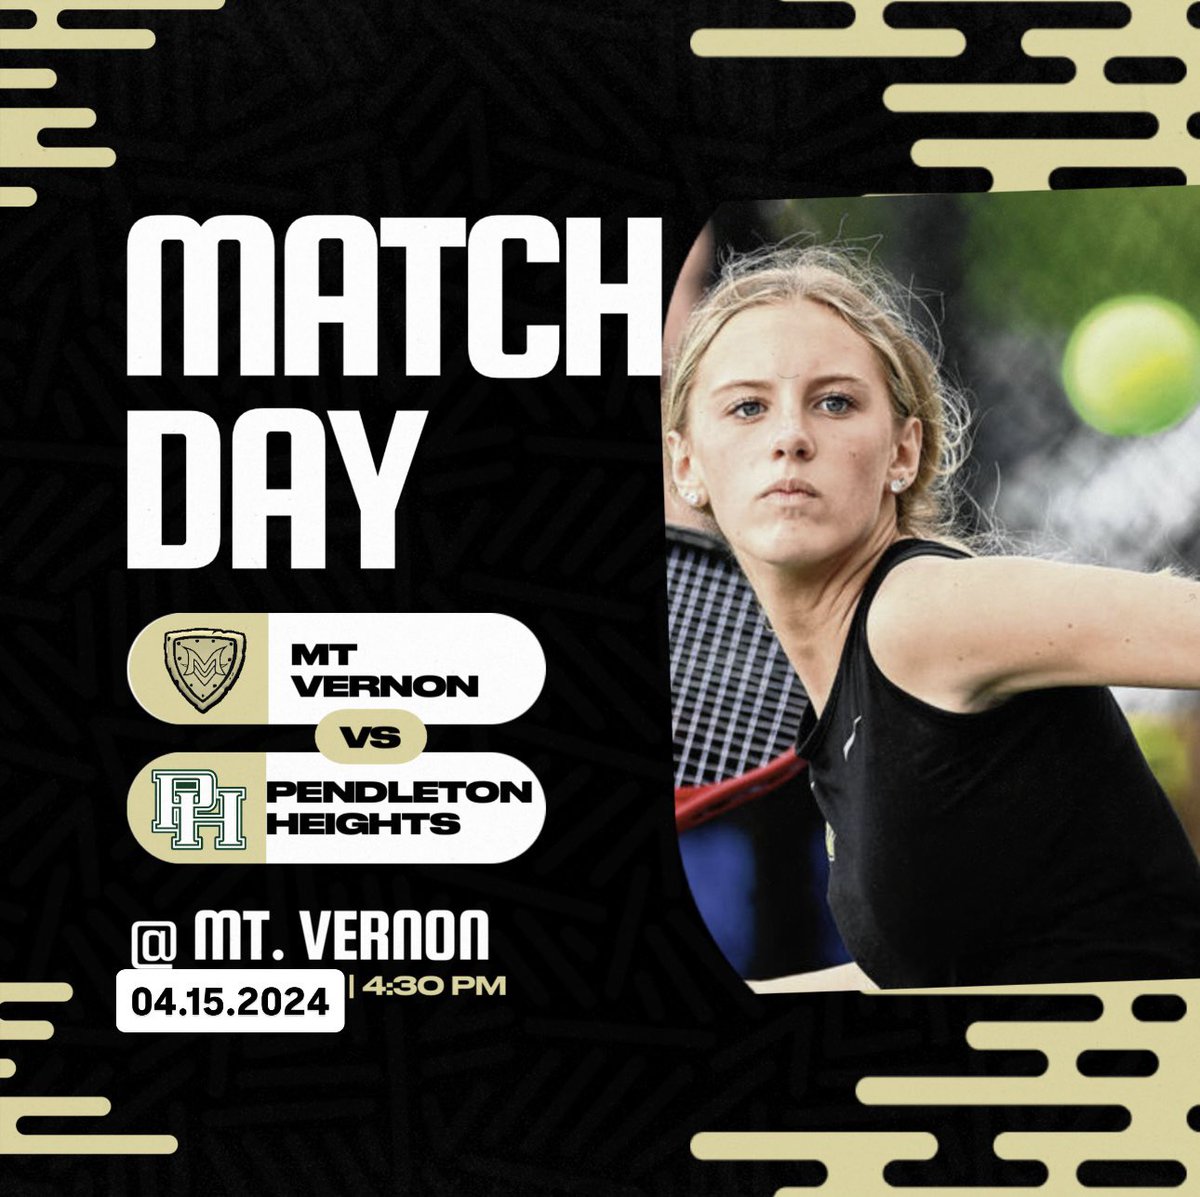 #MatchDay

Reduce, Reuse, Recycle! We’re going to try this again! The sun is out, so come out and support the Girls in their first home match today against Pendleton Heights! 

🎾 >> Girls Tennis
🆚 >> Pendleton Heights
📍 >> Mt. Vernon High School
⏱️ >> 4:30pm

#DefendTheShield